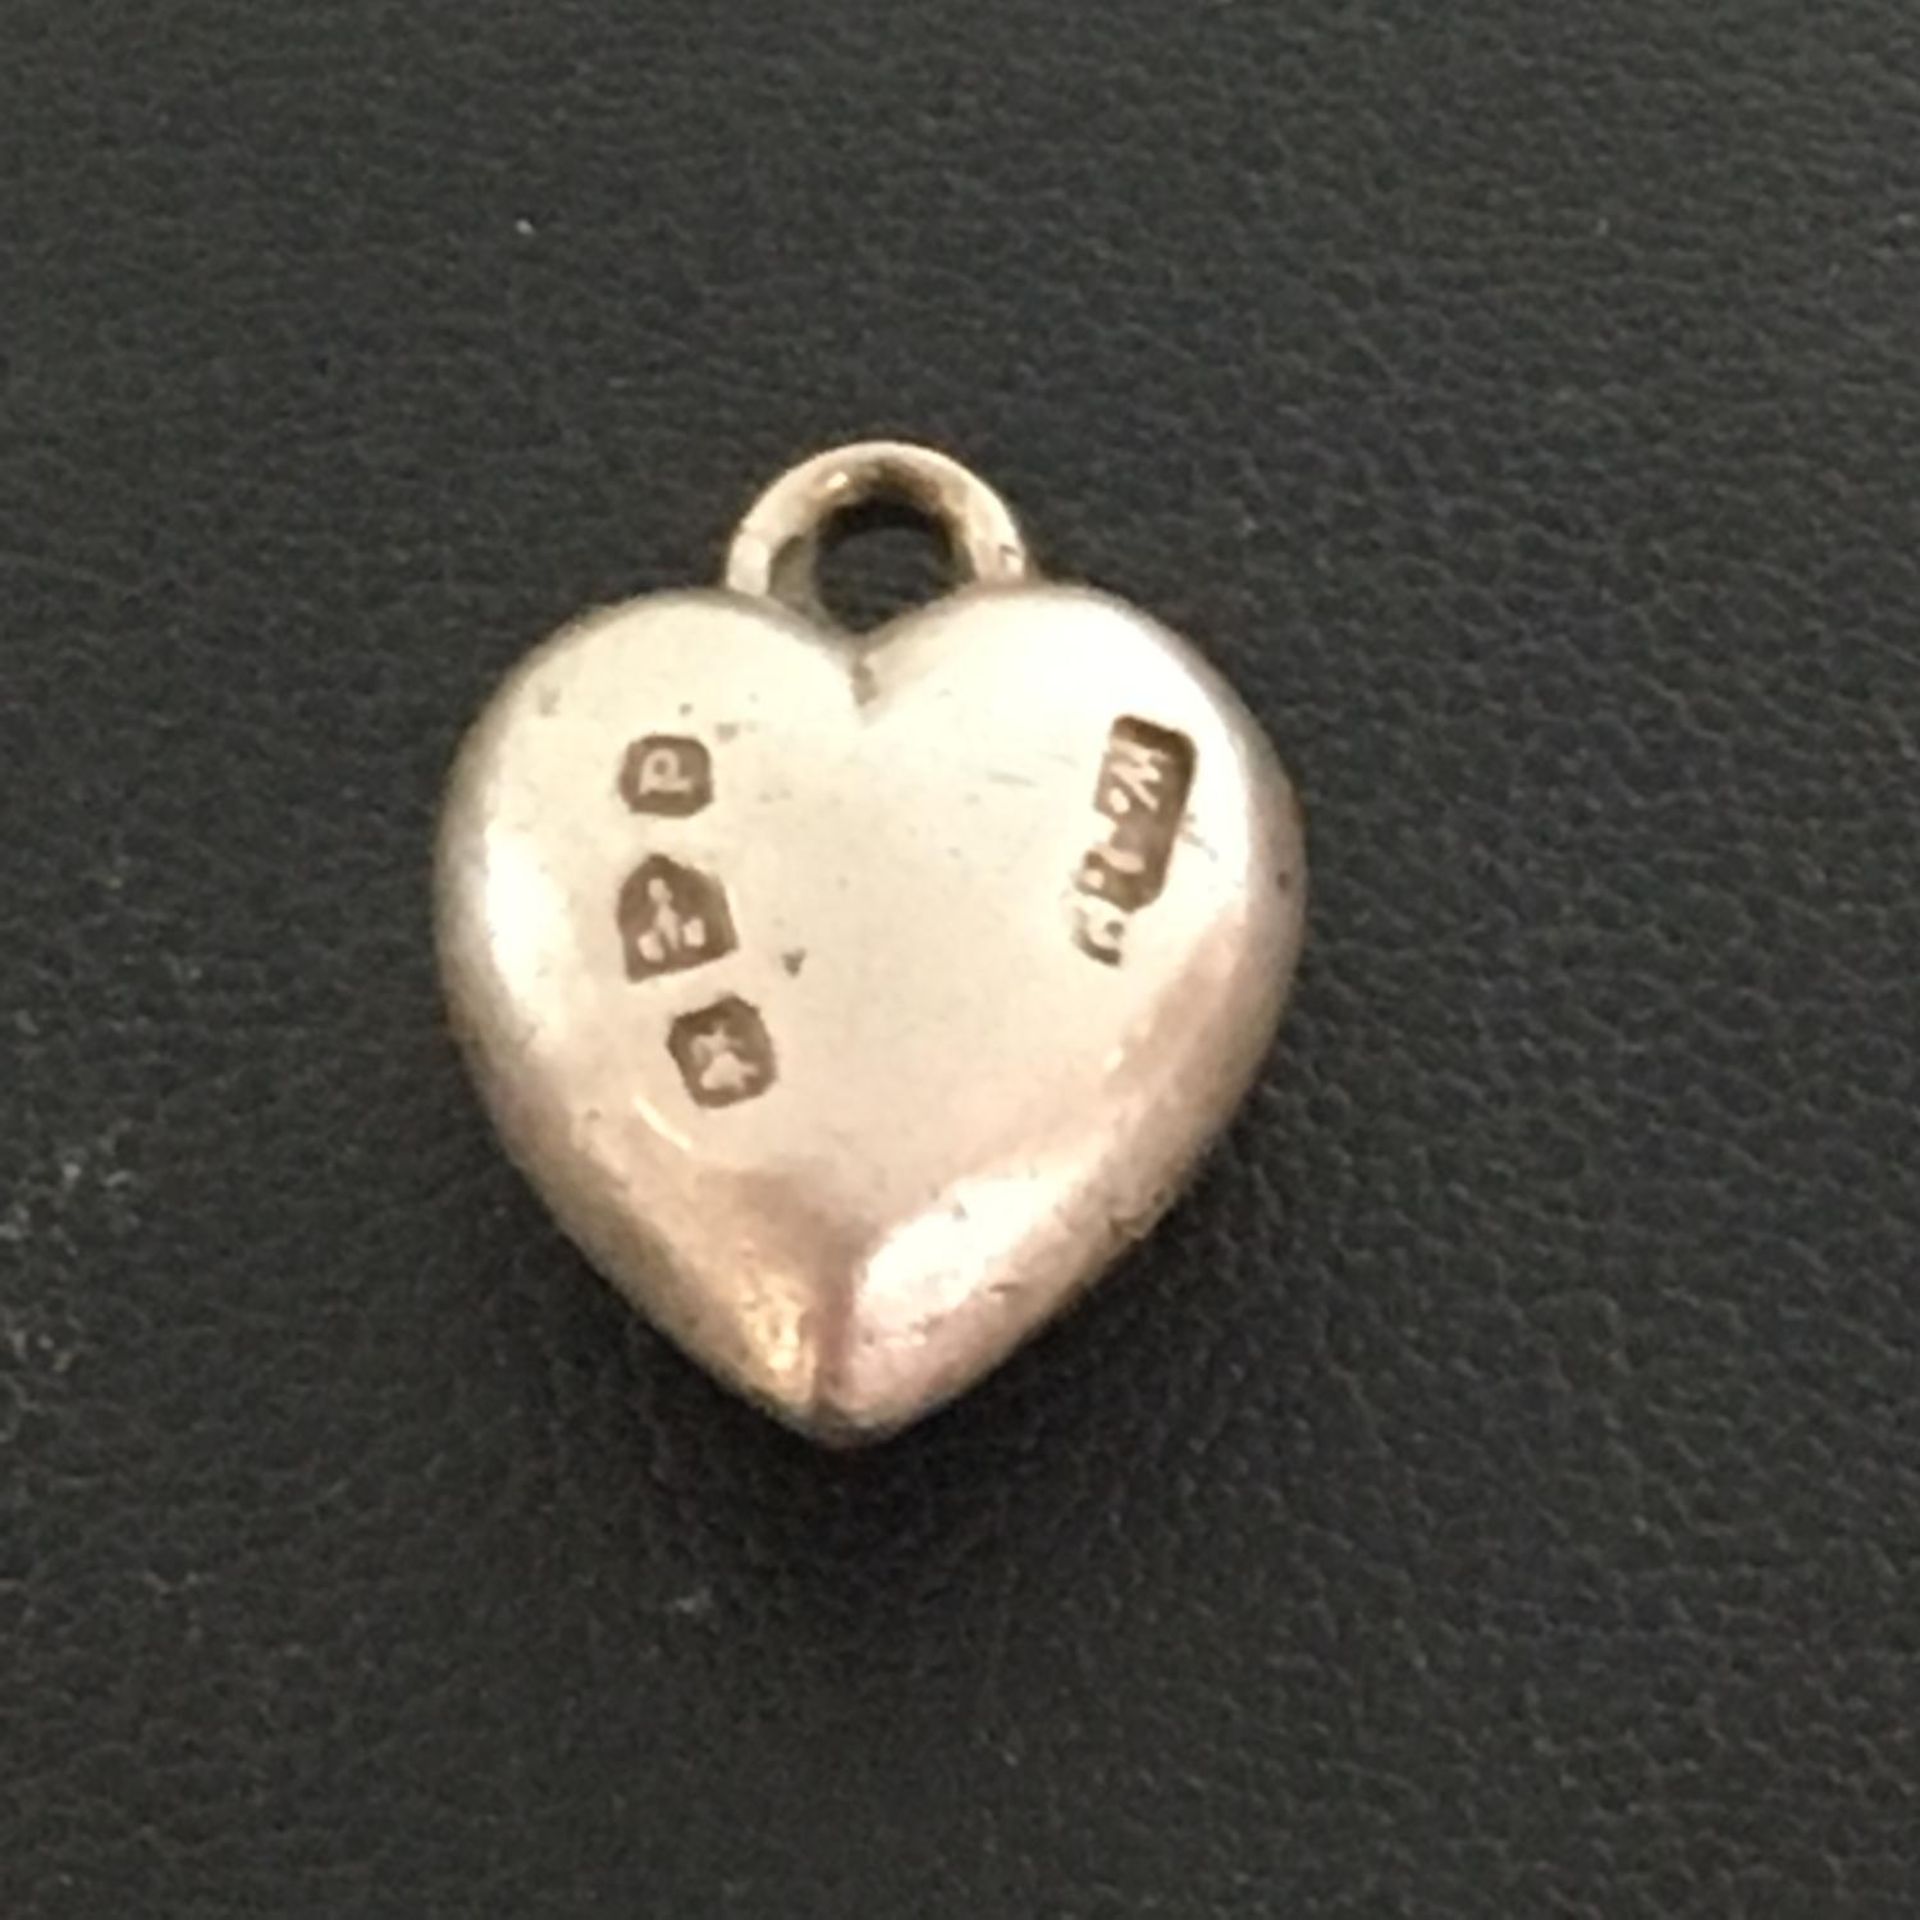 HALLMARKED STERLING SILVER HEART SHAPED PENDANT. Chester hallmarks 1898. The hammer price includes